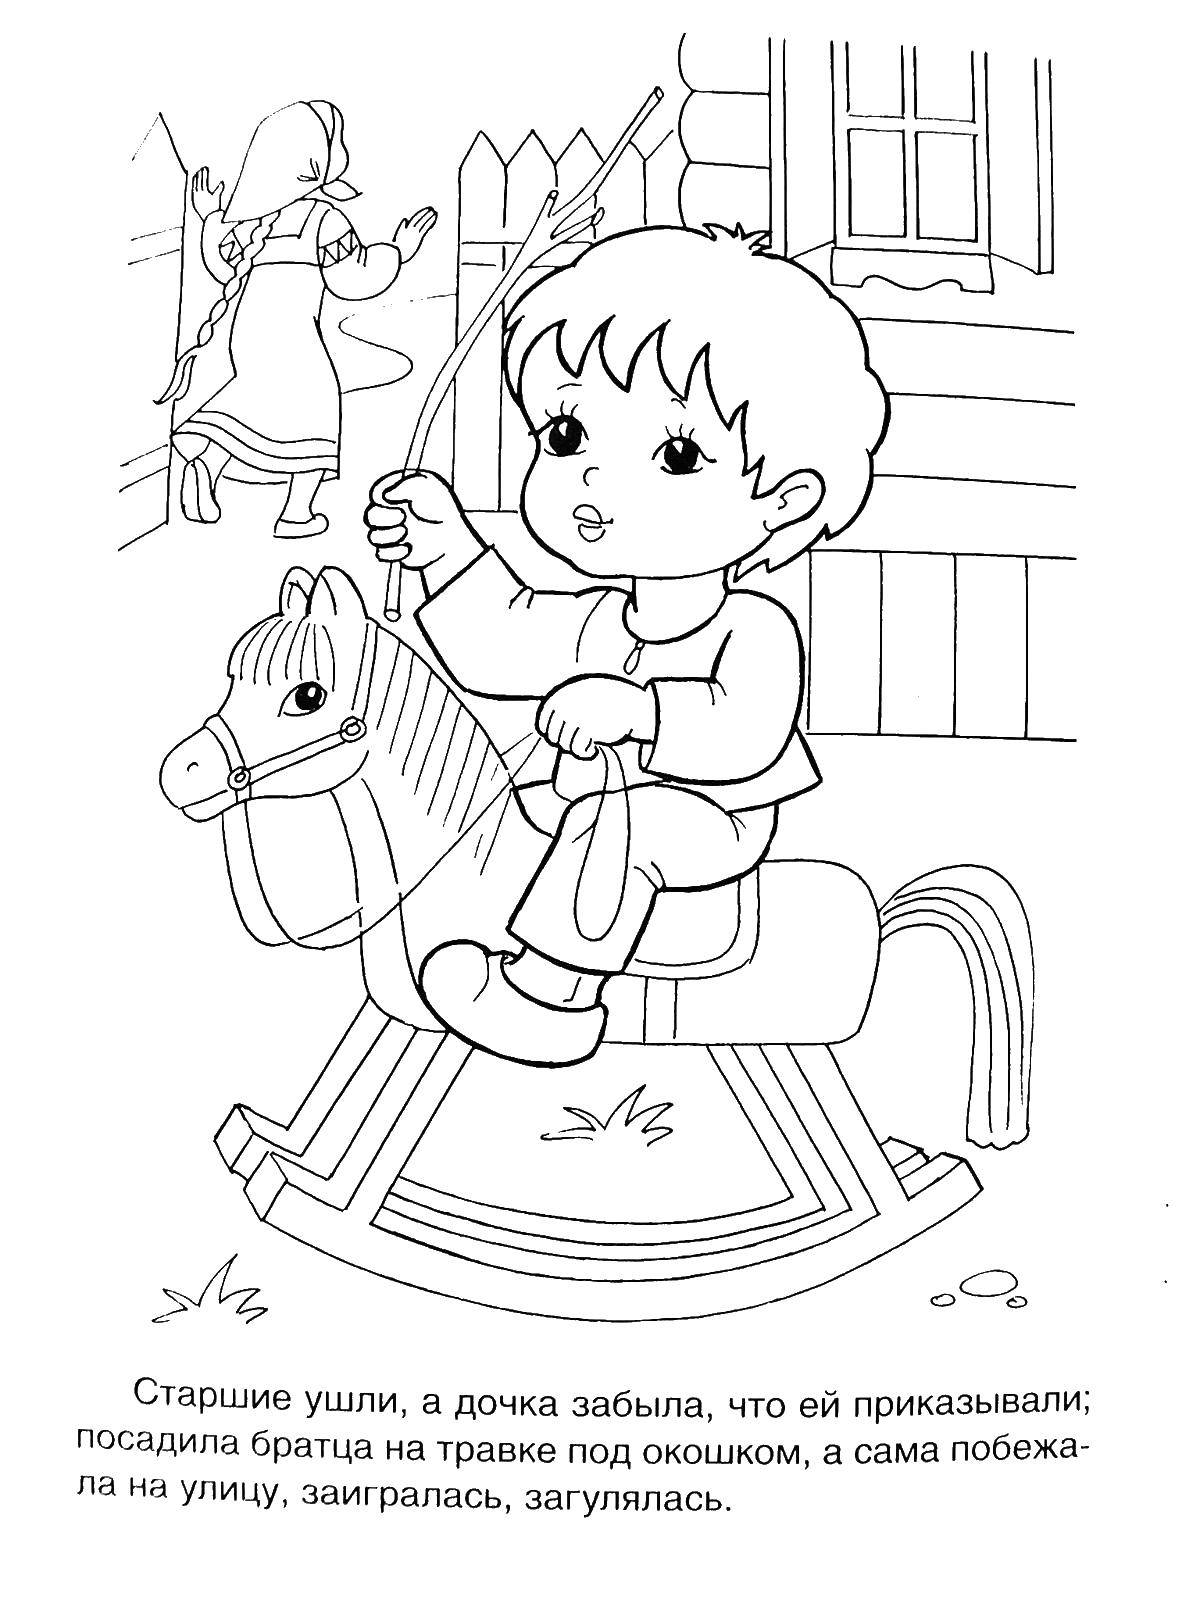 Coloring Boy swinging on a horse. Category geese, swans. Tags:  geese, swans.